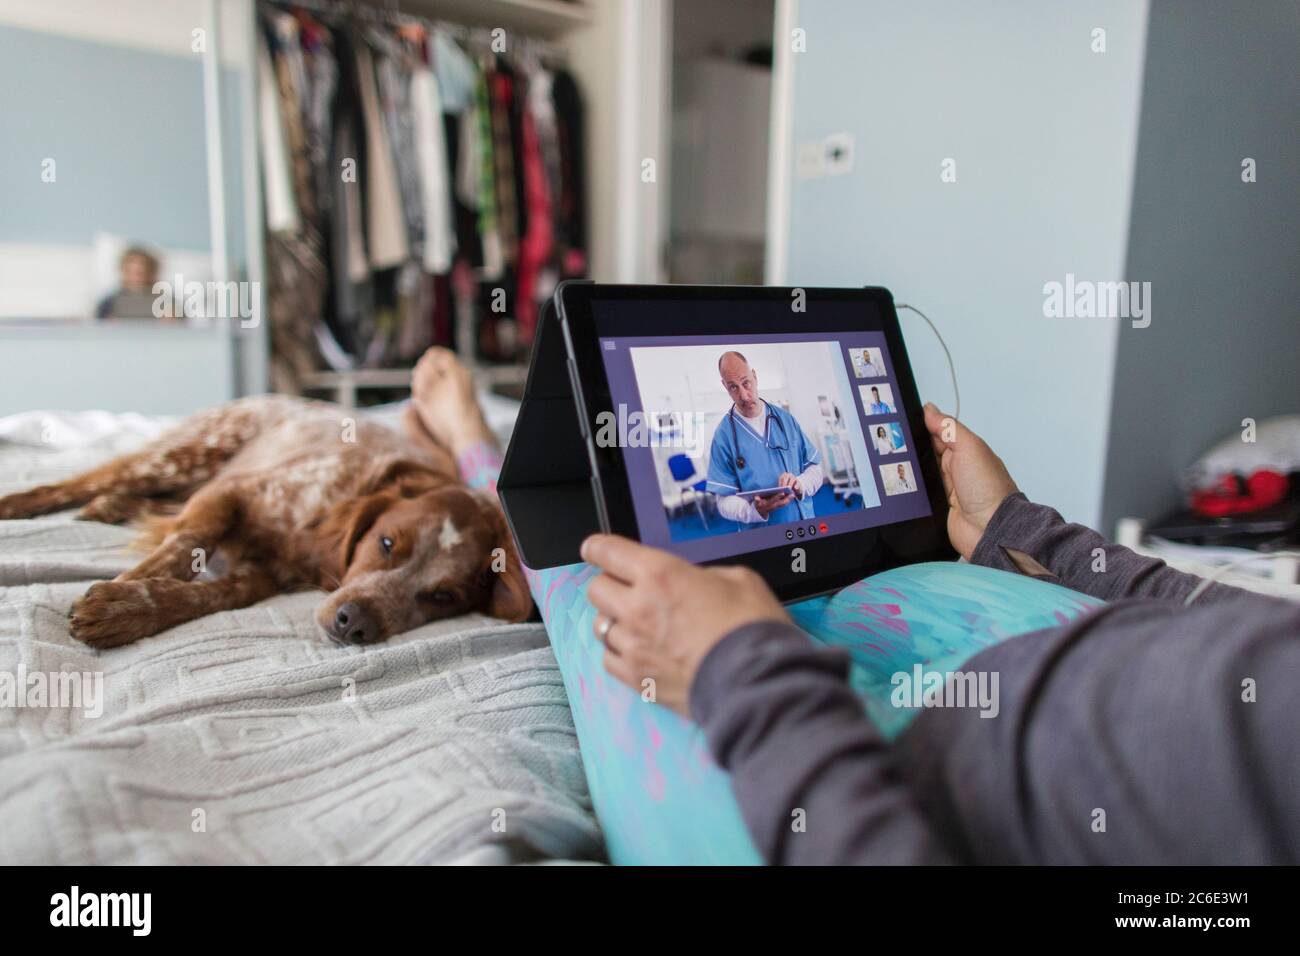 Woman with digital tablet video chatting with doctor on bed with dog Stock Photo